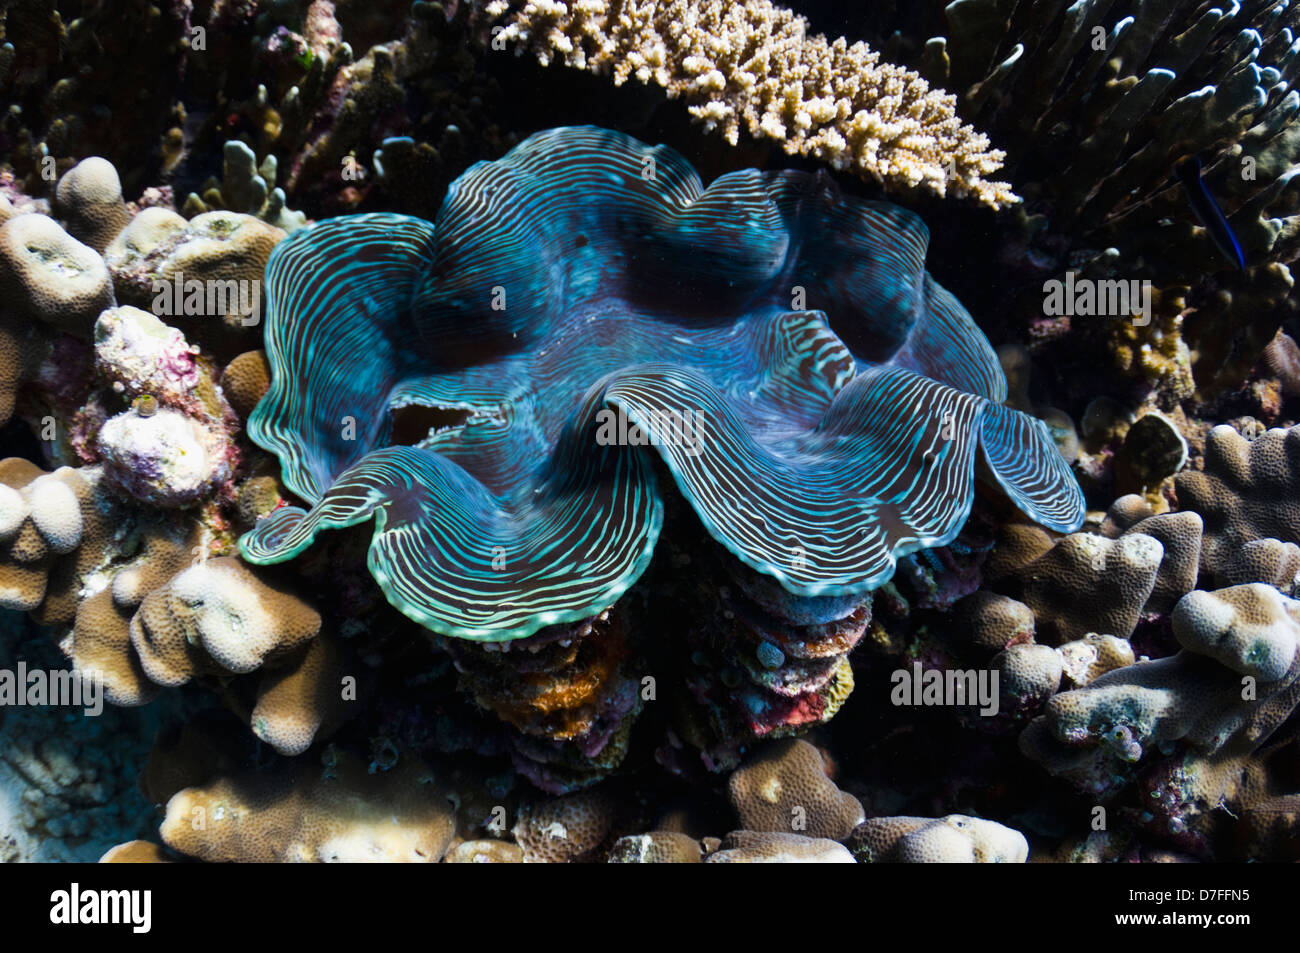 Fluted giant clam (Tridacna squamosa) on coral reef. Maldives. Stock Photo